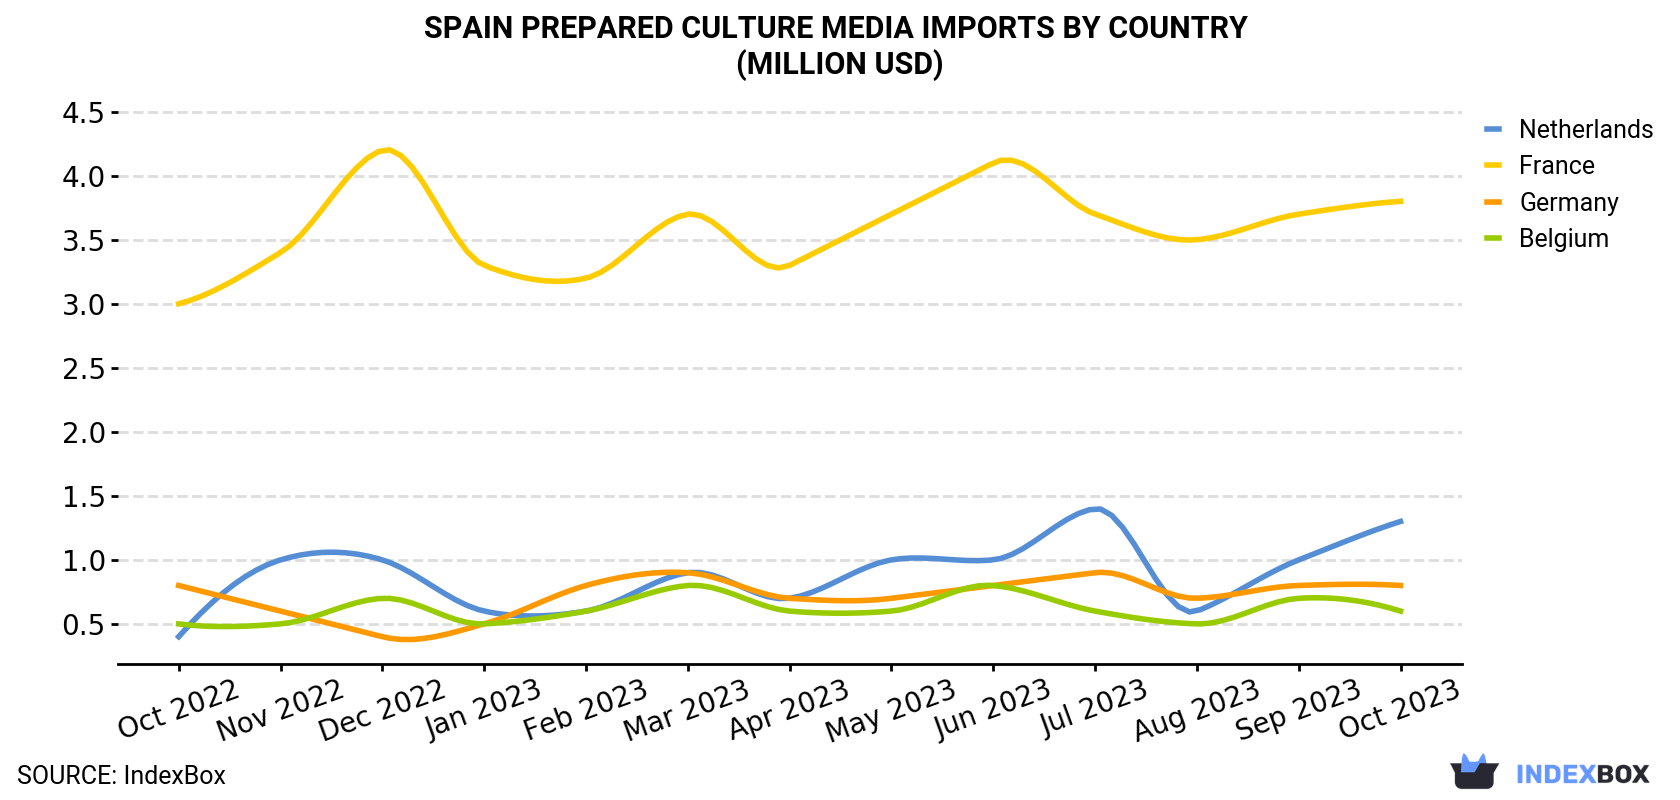 Spain Prepared Culture Media Imports By Country (Million USD)